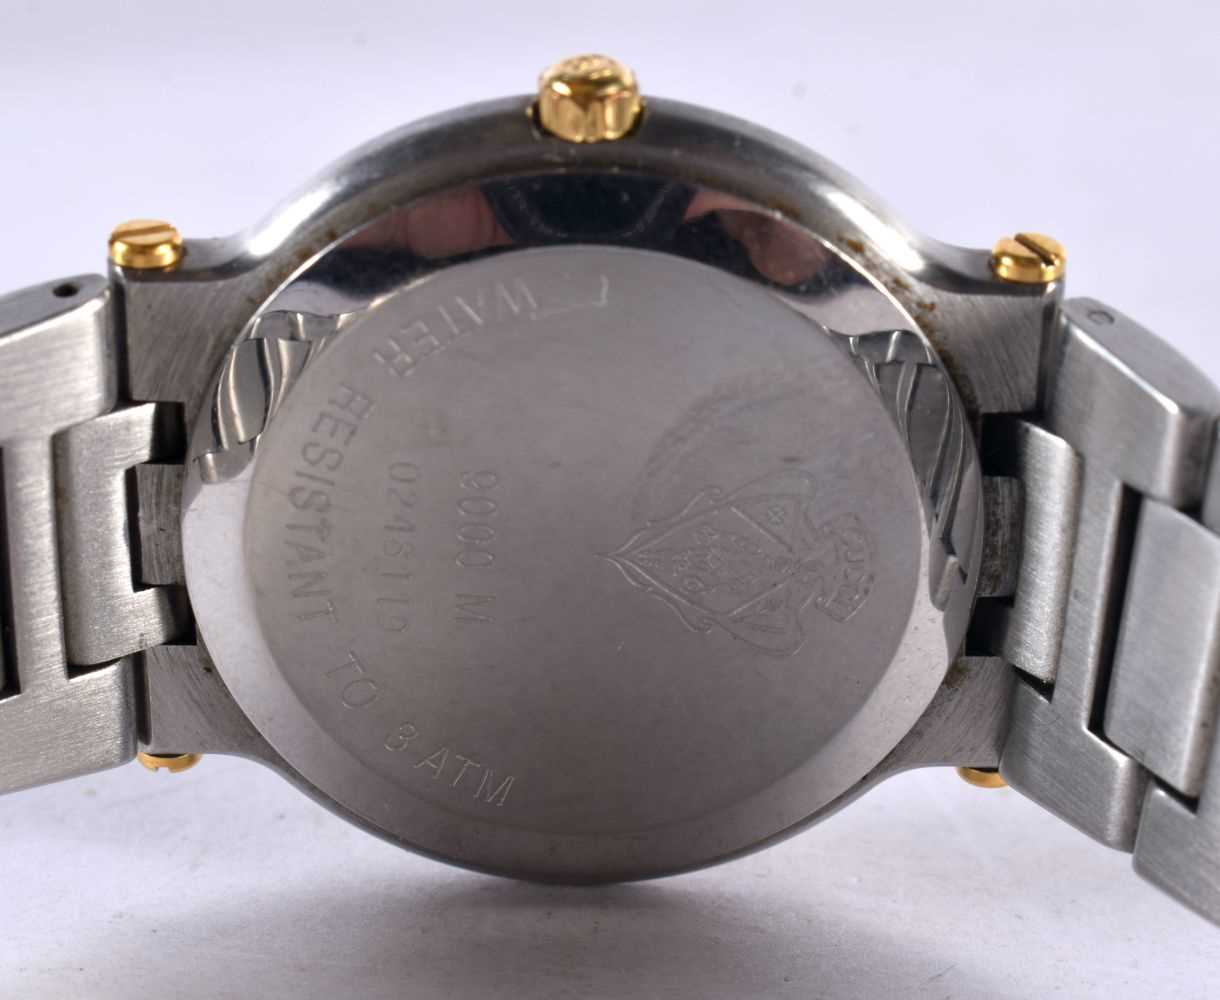 Gucci Men's Watch 9000M. Dial 3.3cm (incl crown), working - Image 5 of 6